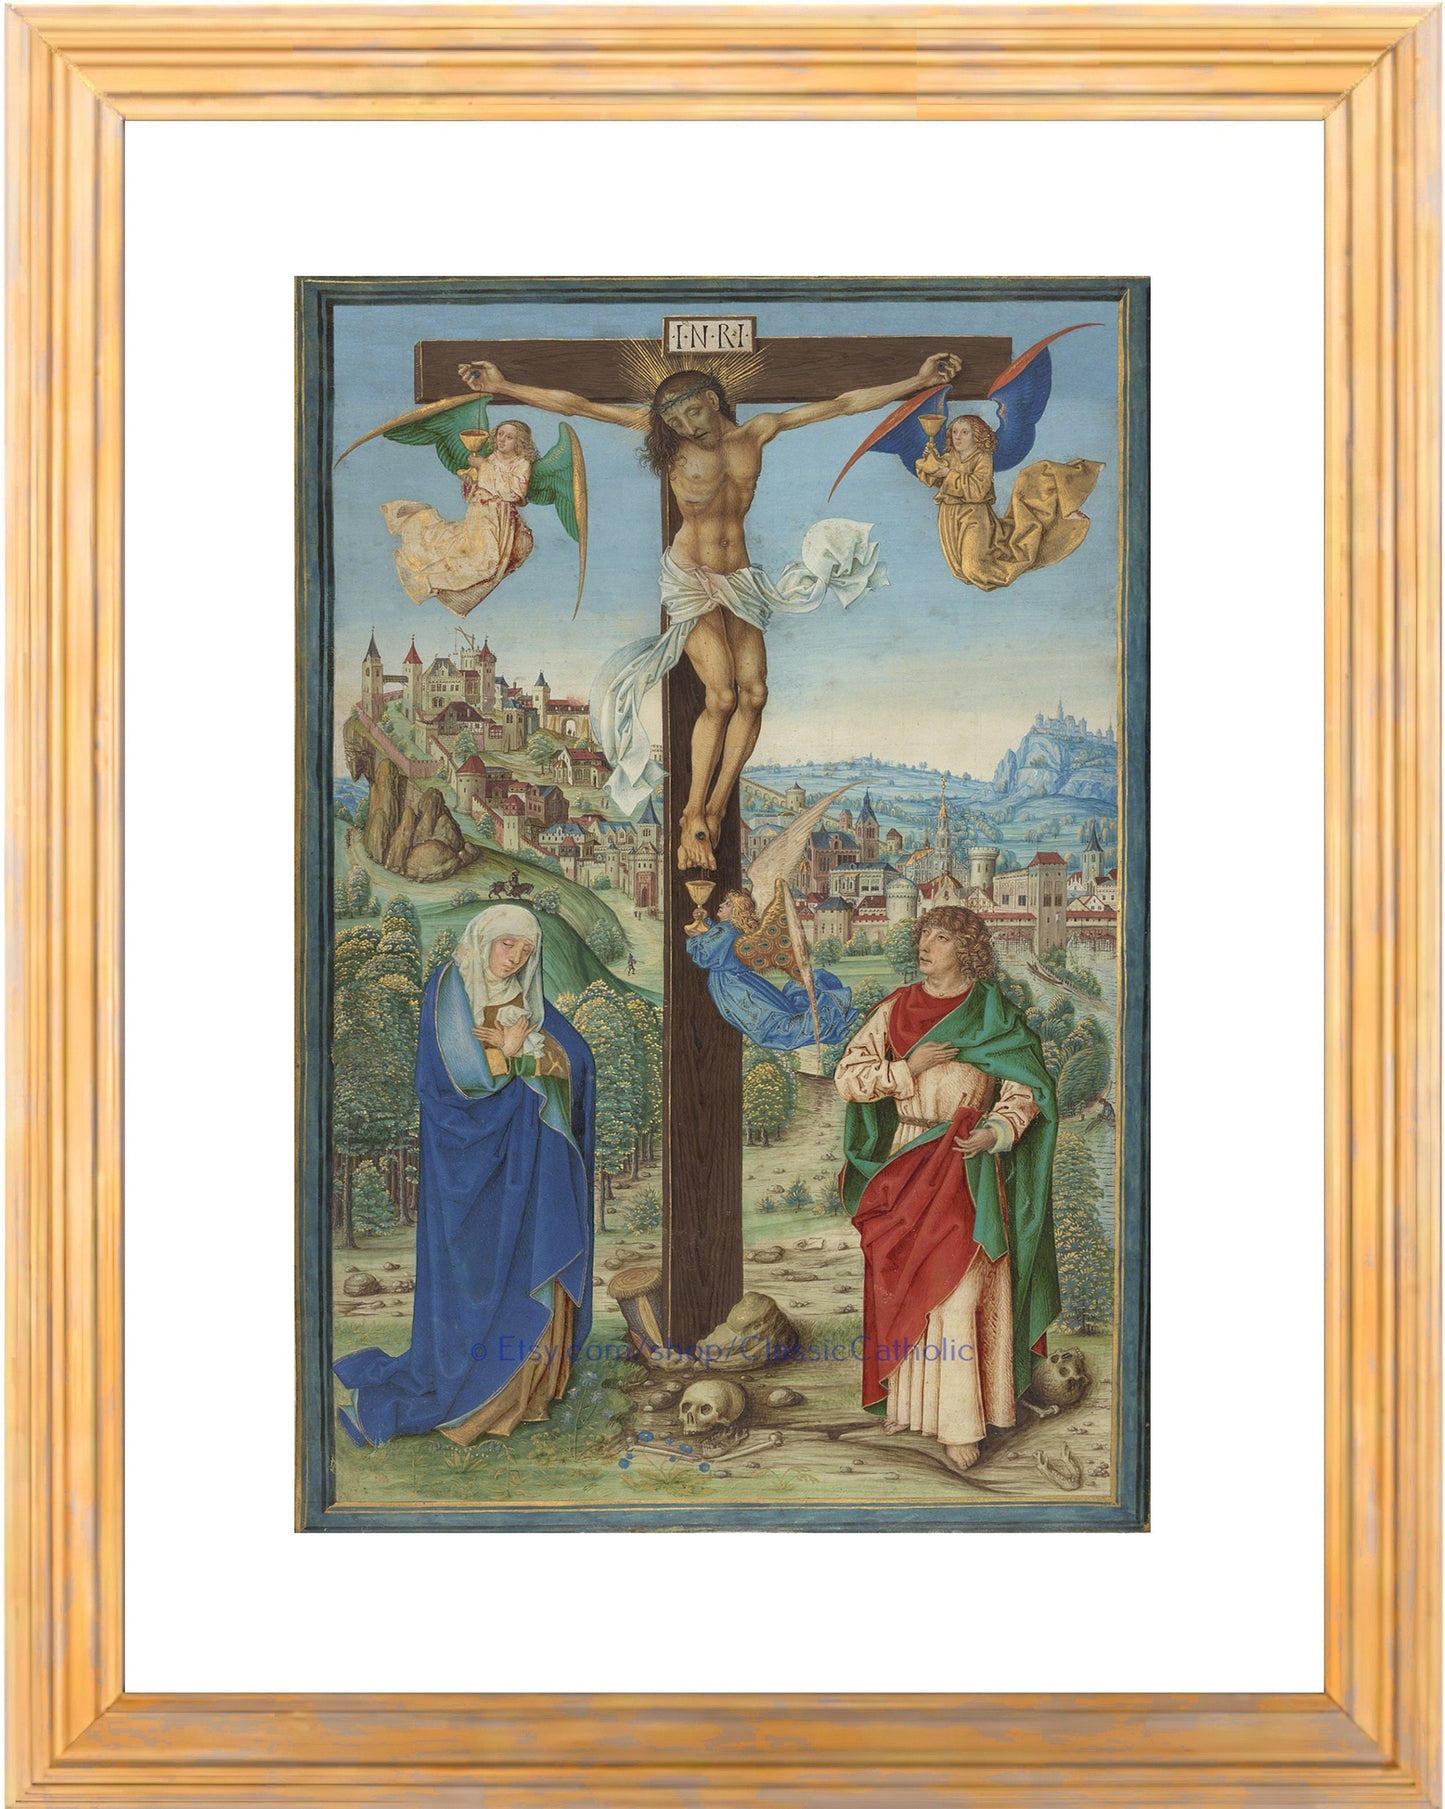 The Crucifixion – Sacrament of the Altar – Medieval Catholic Art Print – Archival Quality – Hi Res